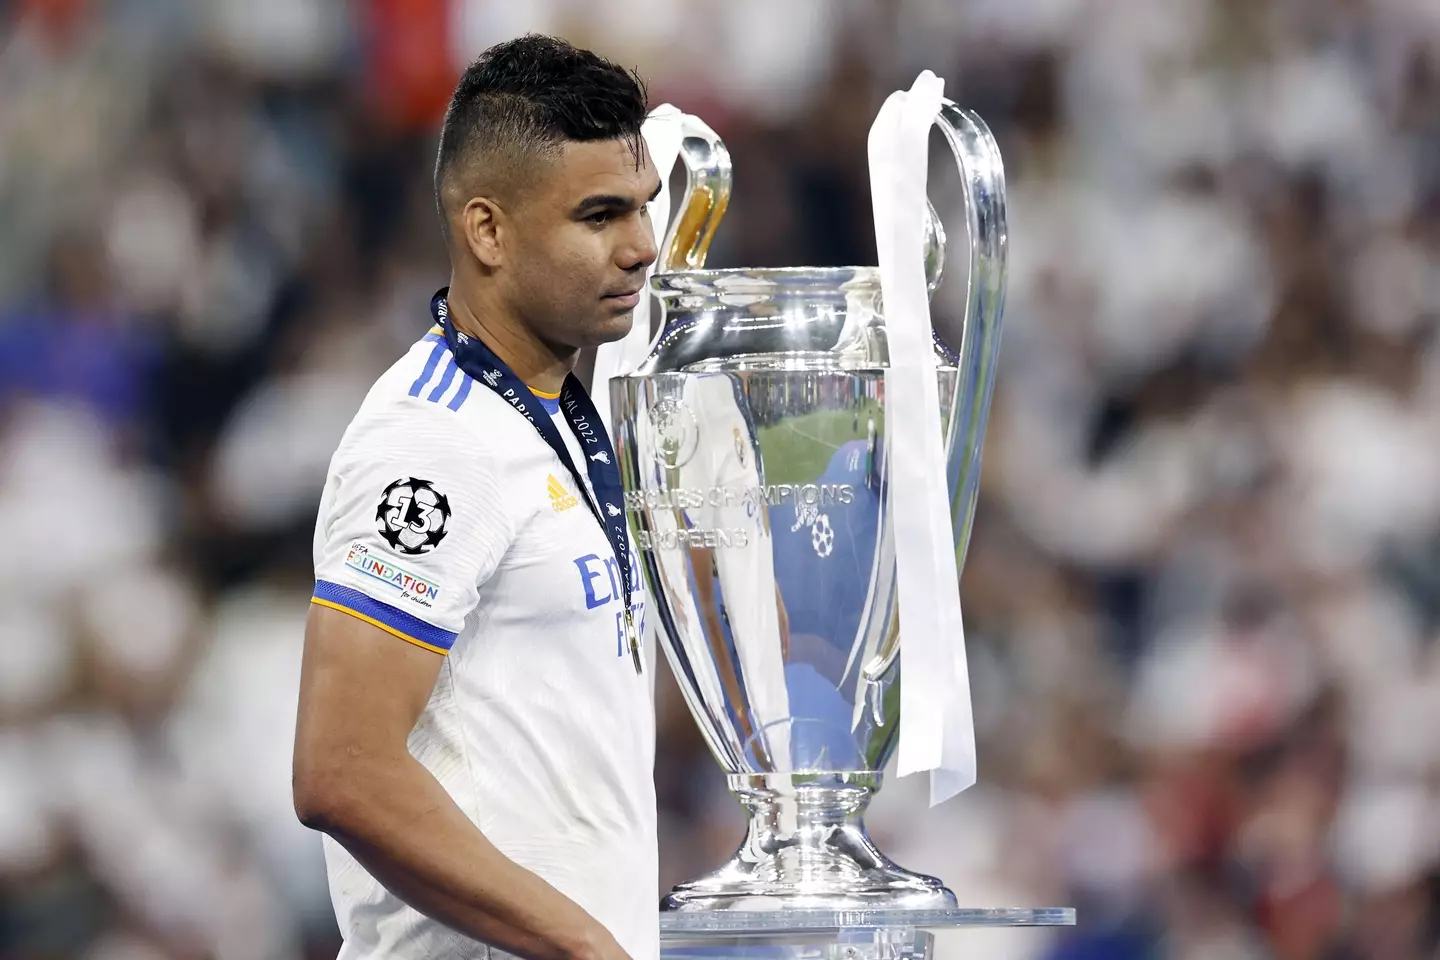 Casemiro has won 15 major trophies with Real. (Image